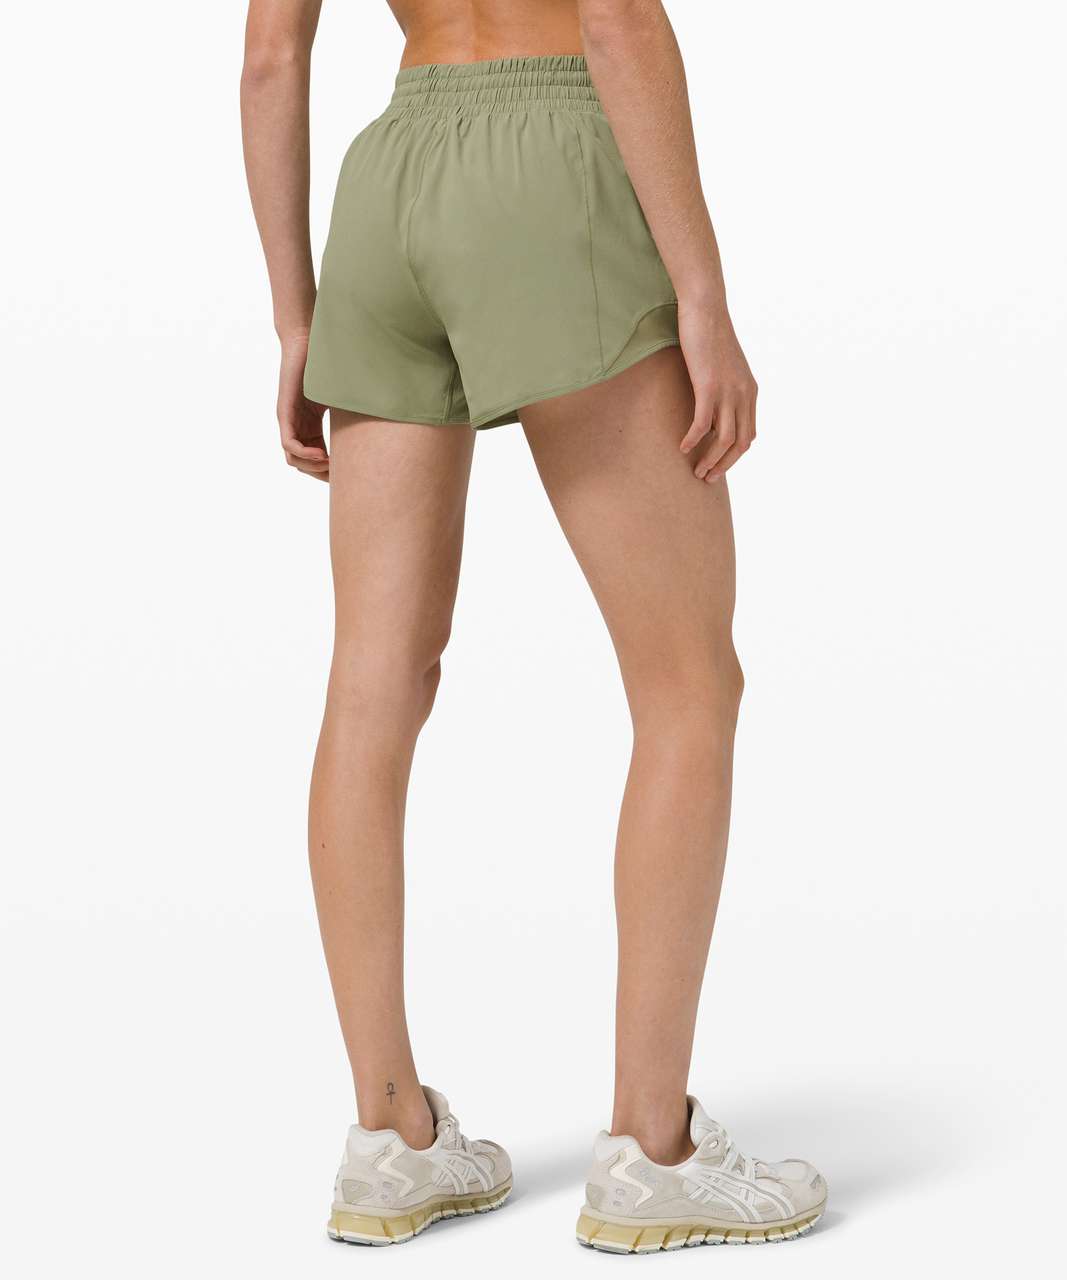 Lululemon Hotty Hot Shorts 4” inseam Size 4 Color is Incognito